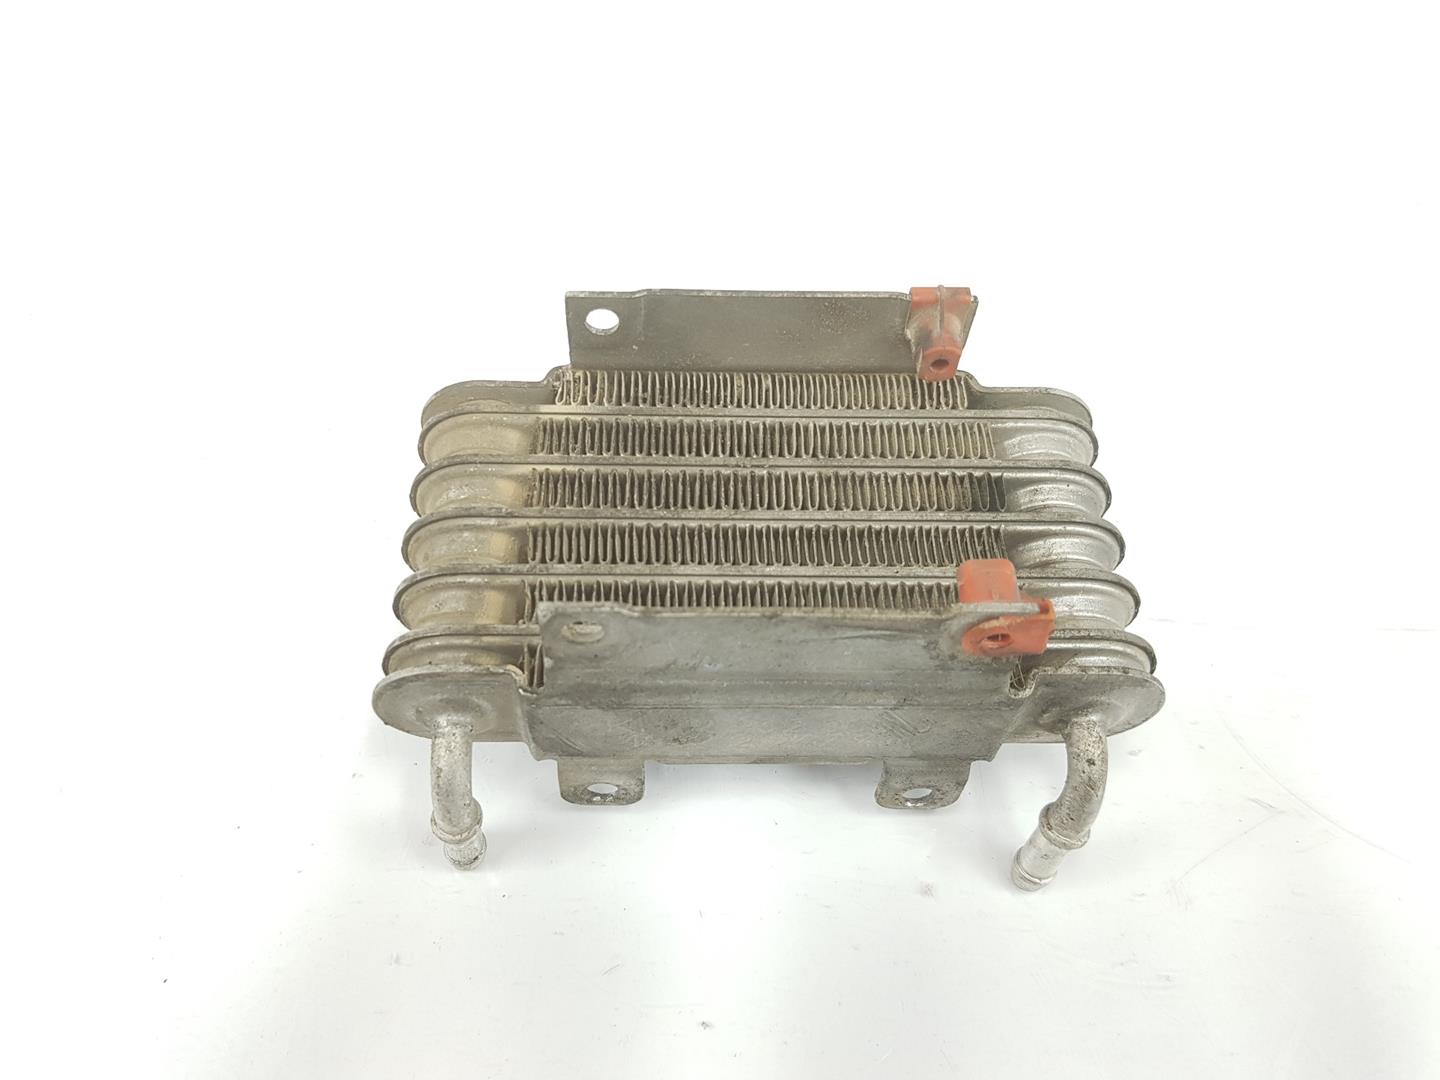 BMW 3 Series E46 (1997-2006) Other Engine Compartment Parts 13322247411, 2247411 21076193